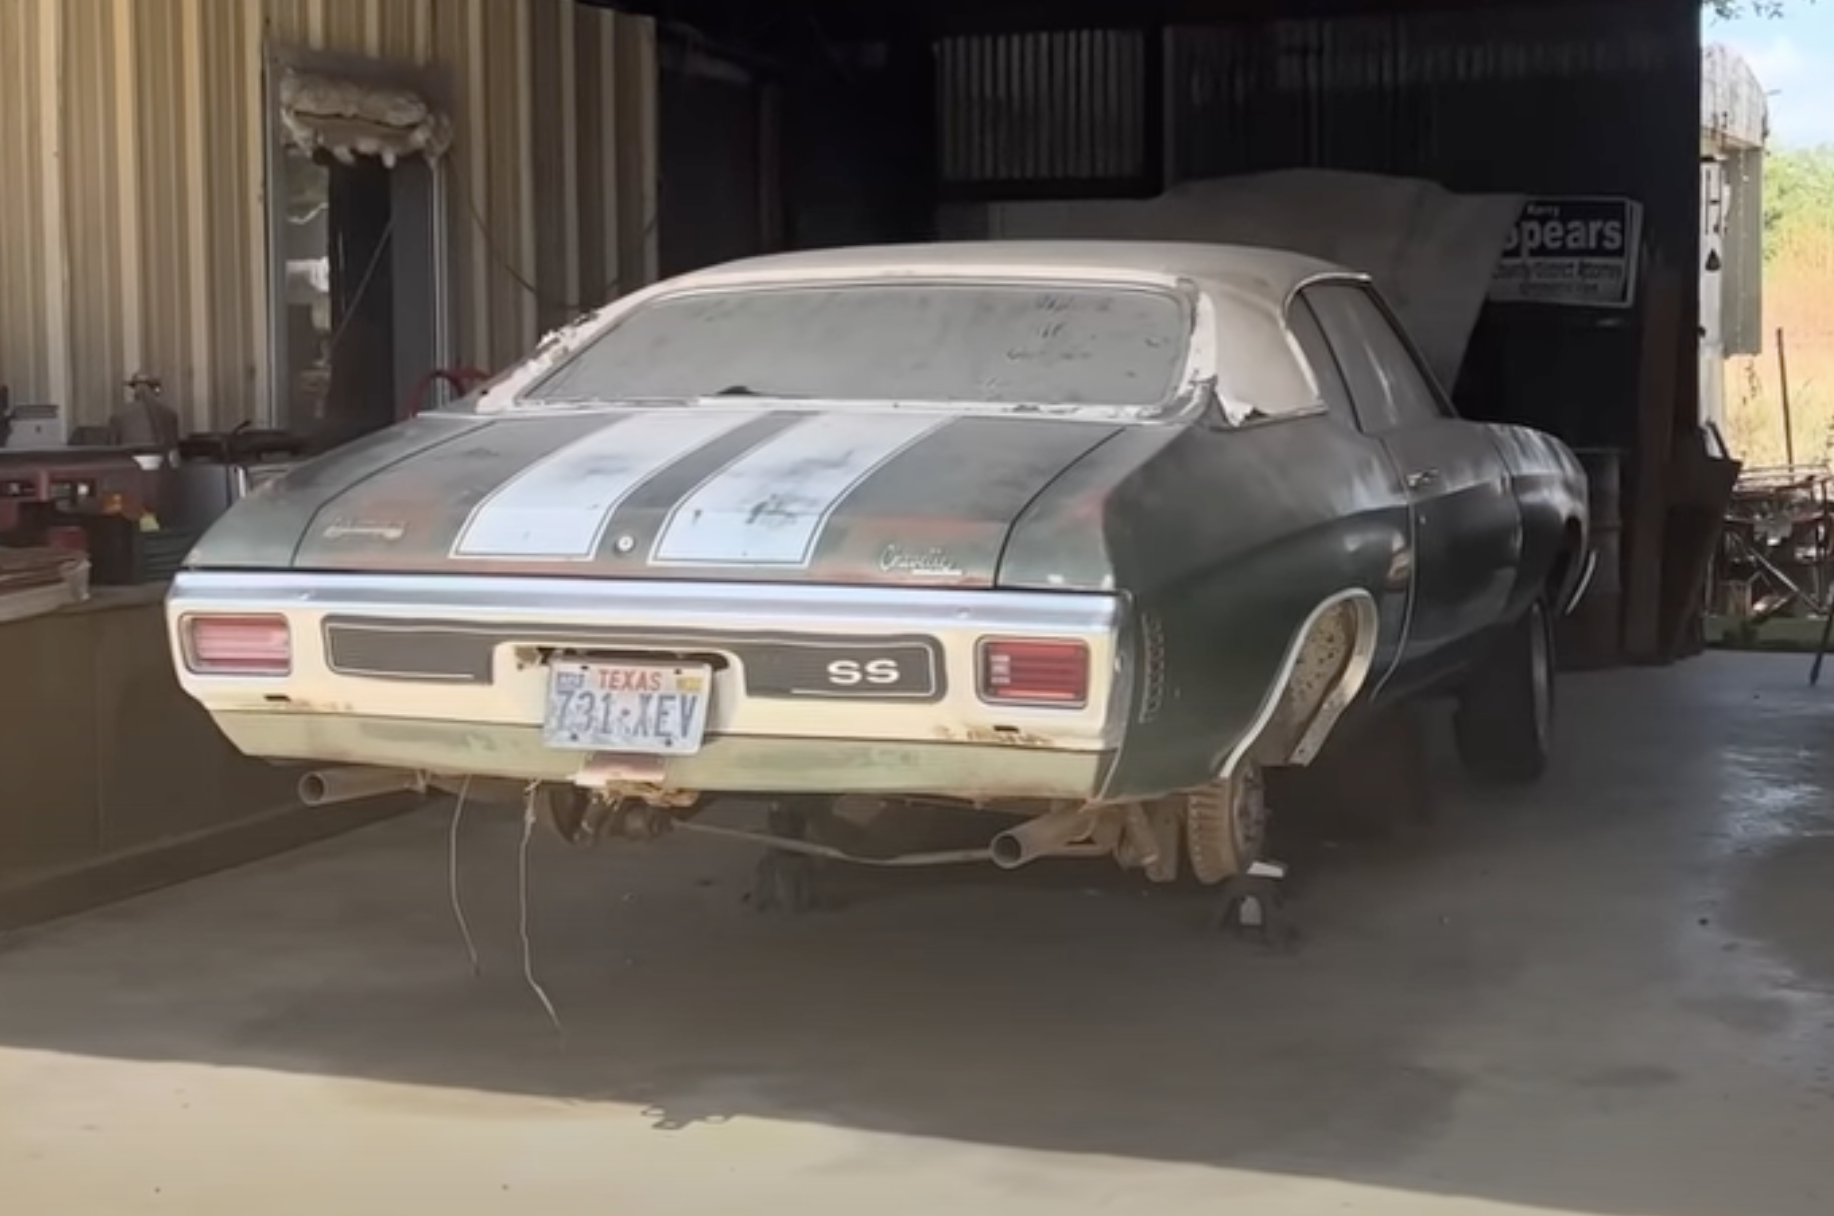 Found: 1970 Chevelle SS 396 Parked in a Texas Barn for Over 30 Years